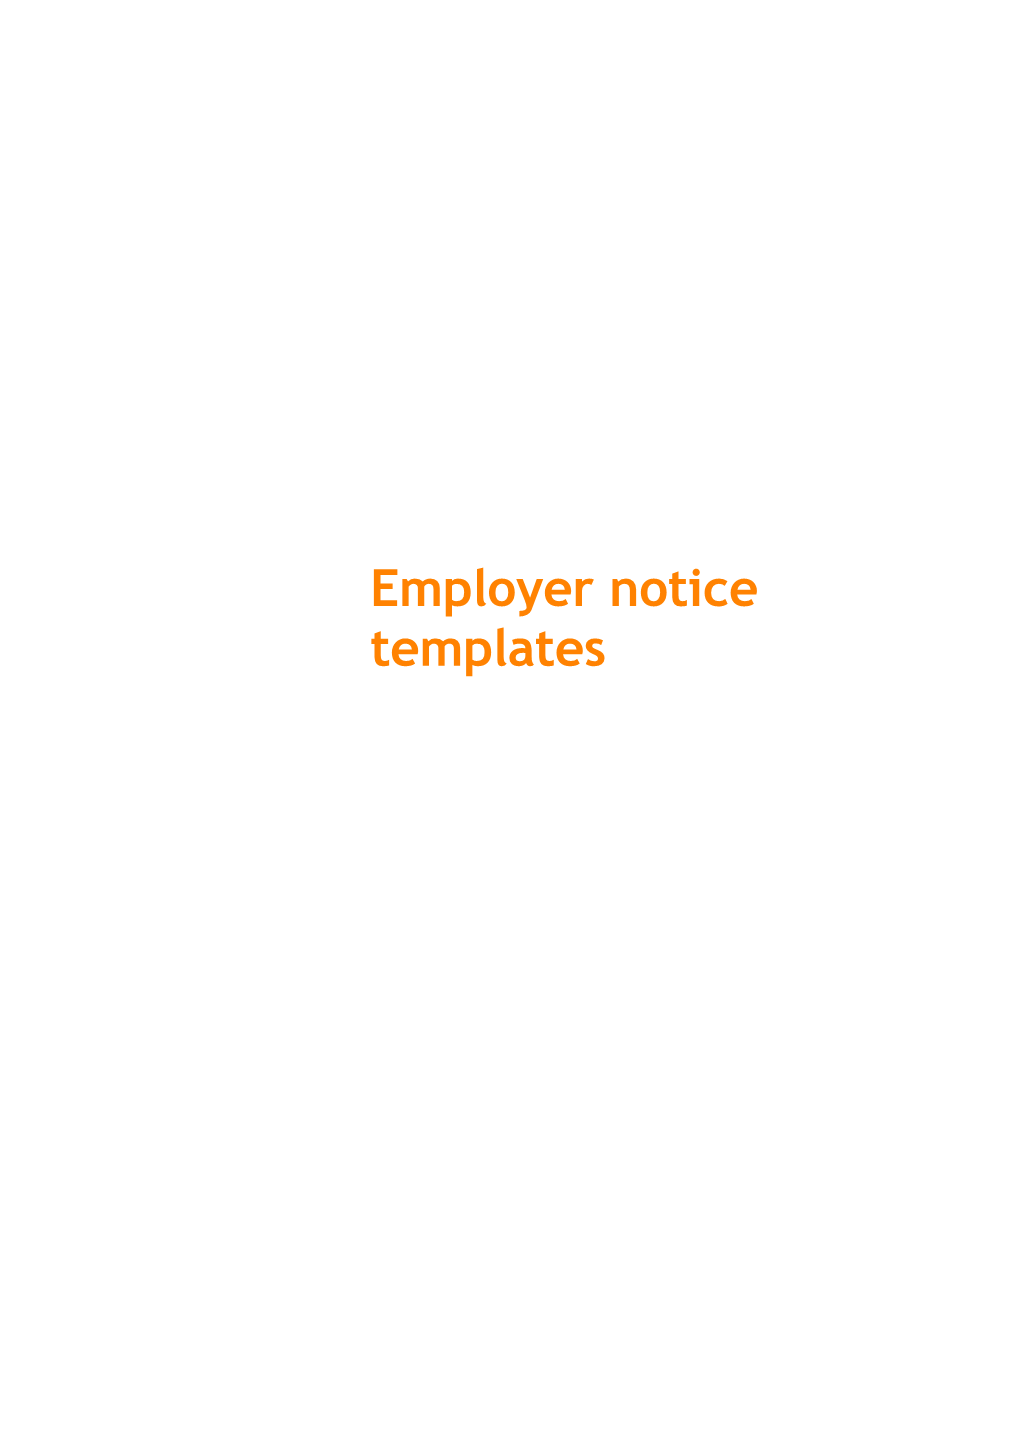 Employer Notices (Marked-Up with GC Changes IRO 2015 Simplification) s1